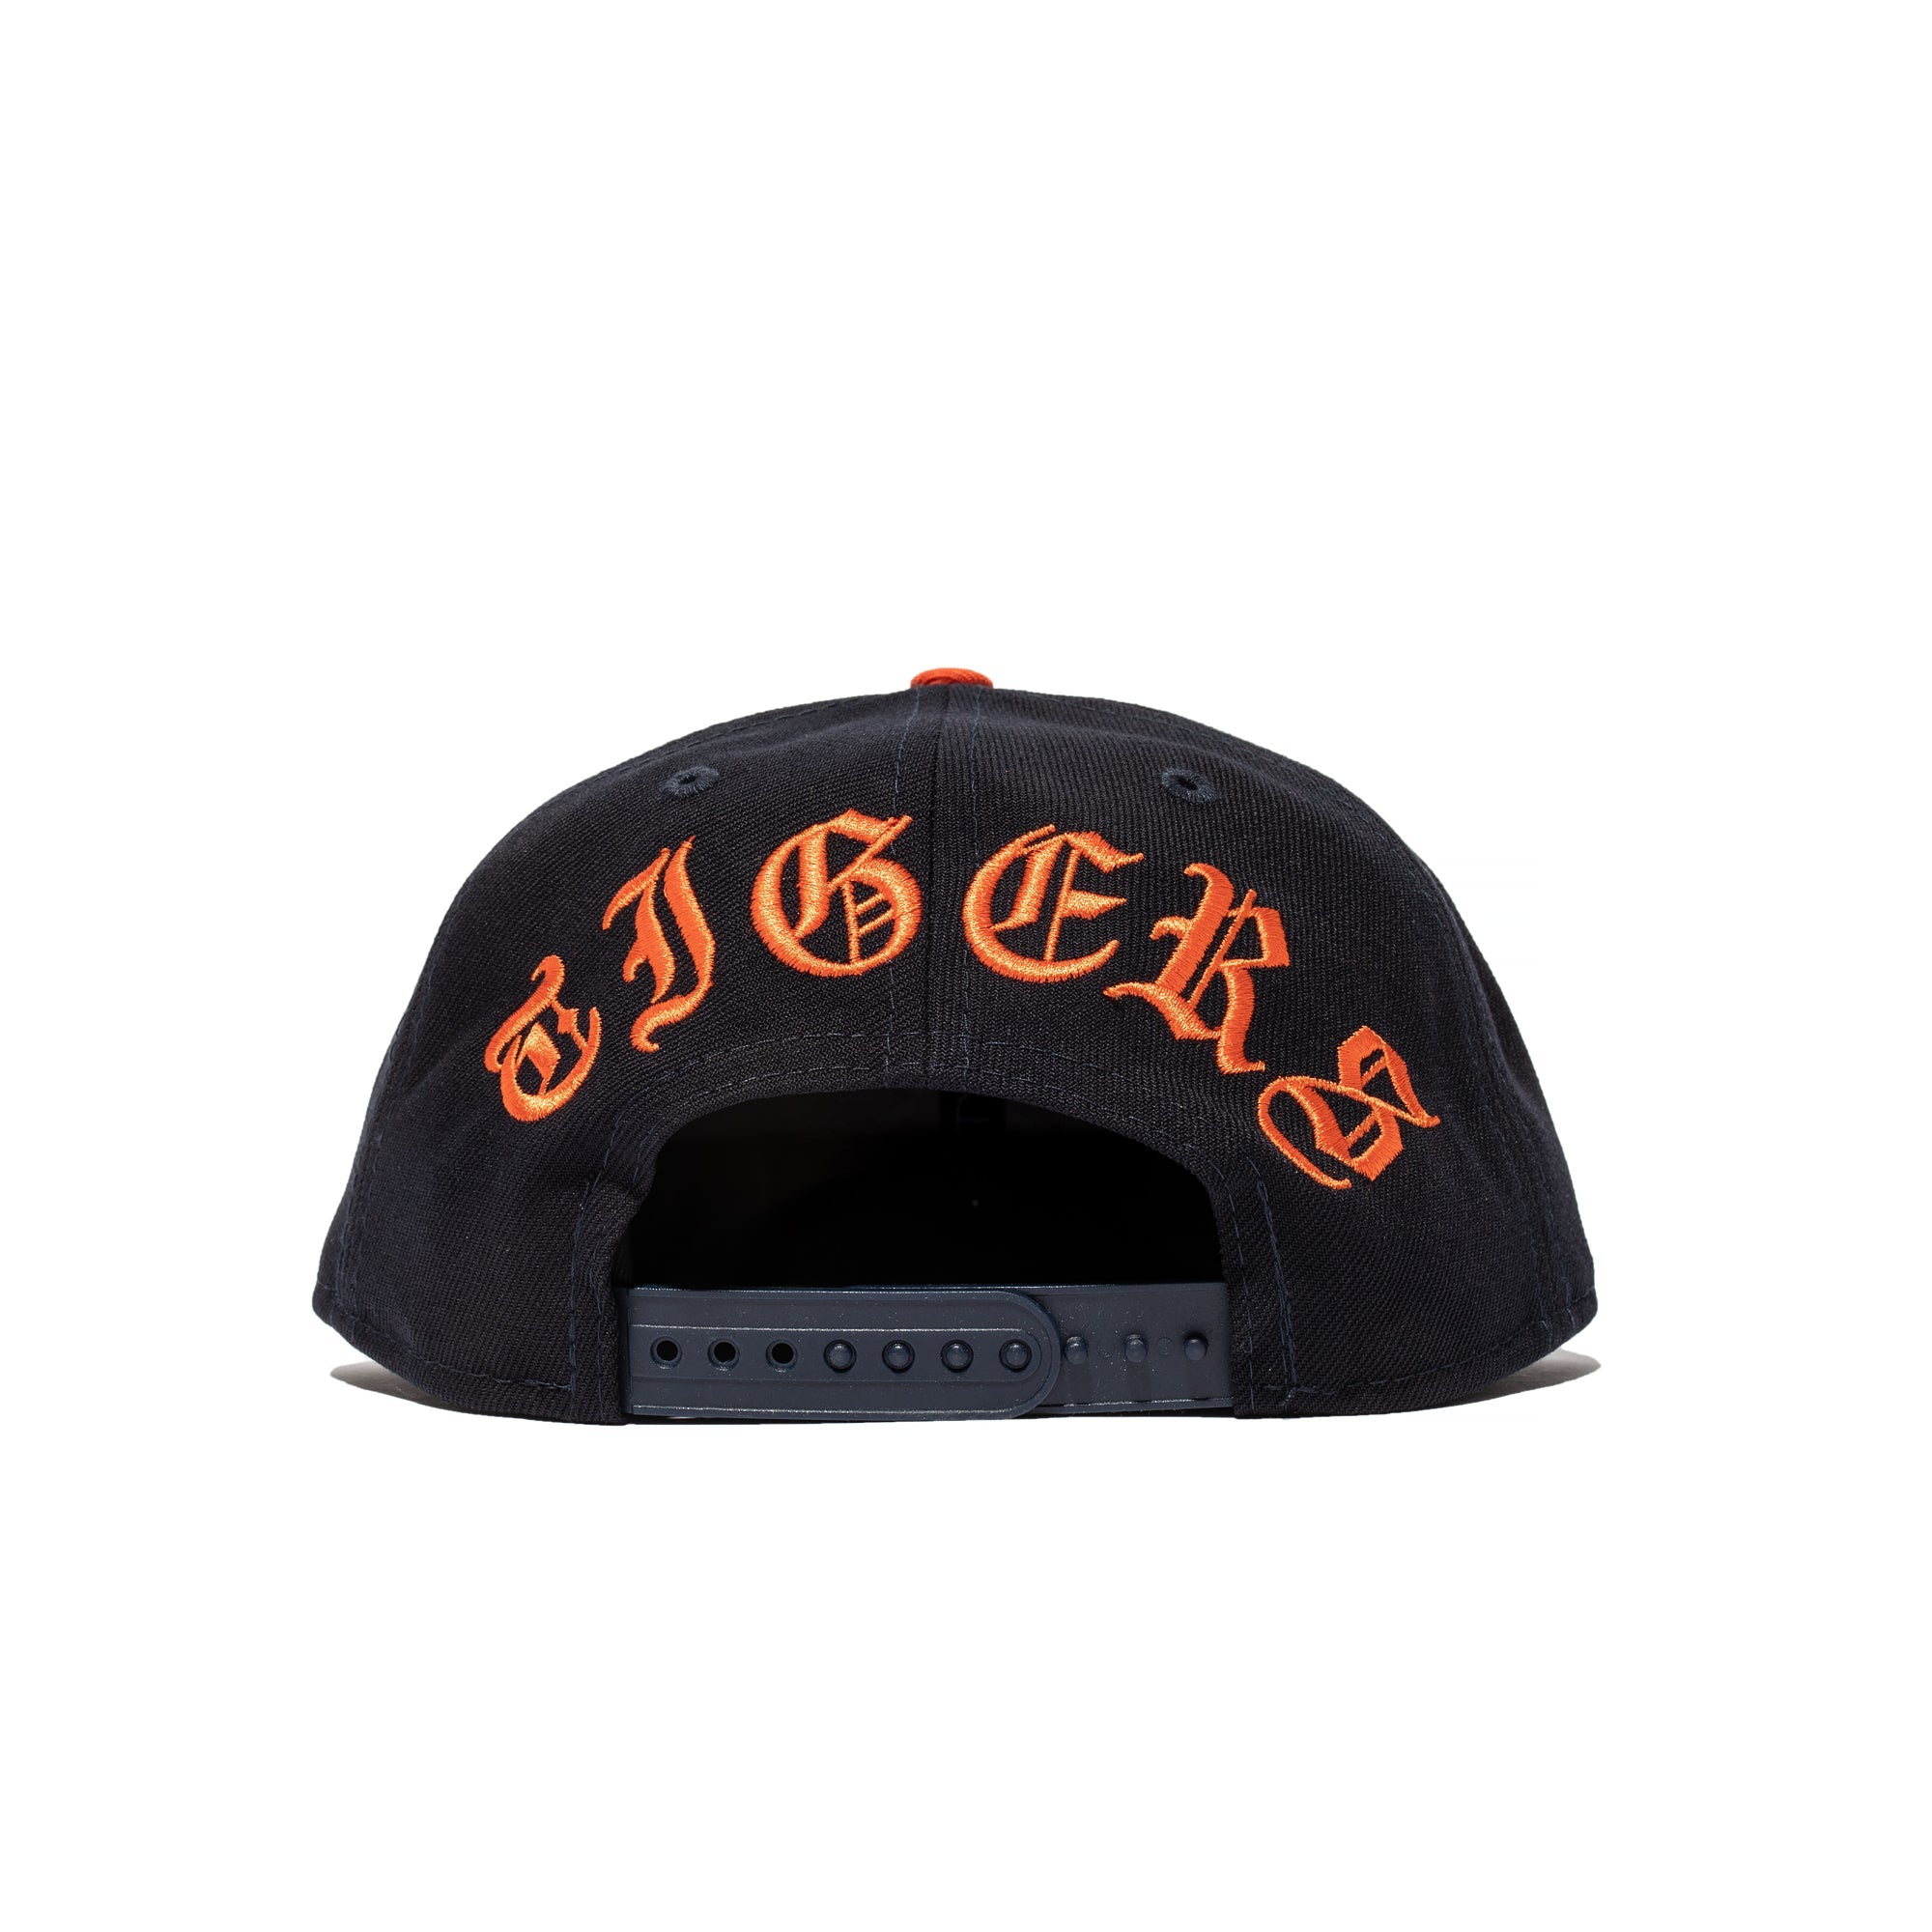 New Era Backletter Arch 9FIFTY Detroit Tigers Snapback Hat